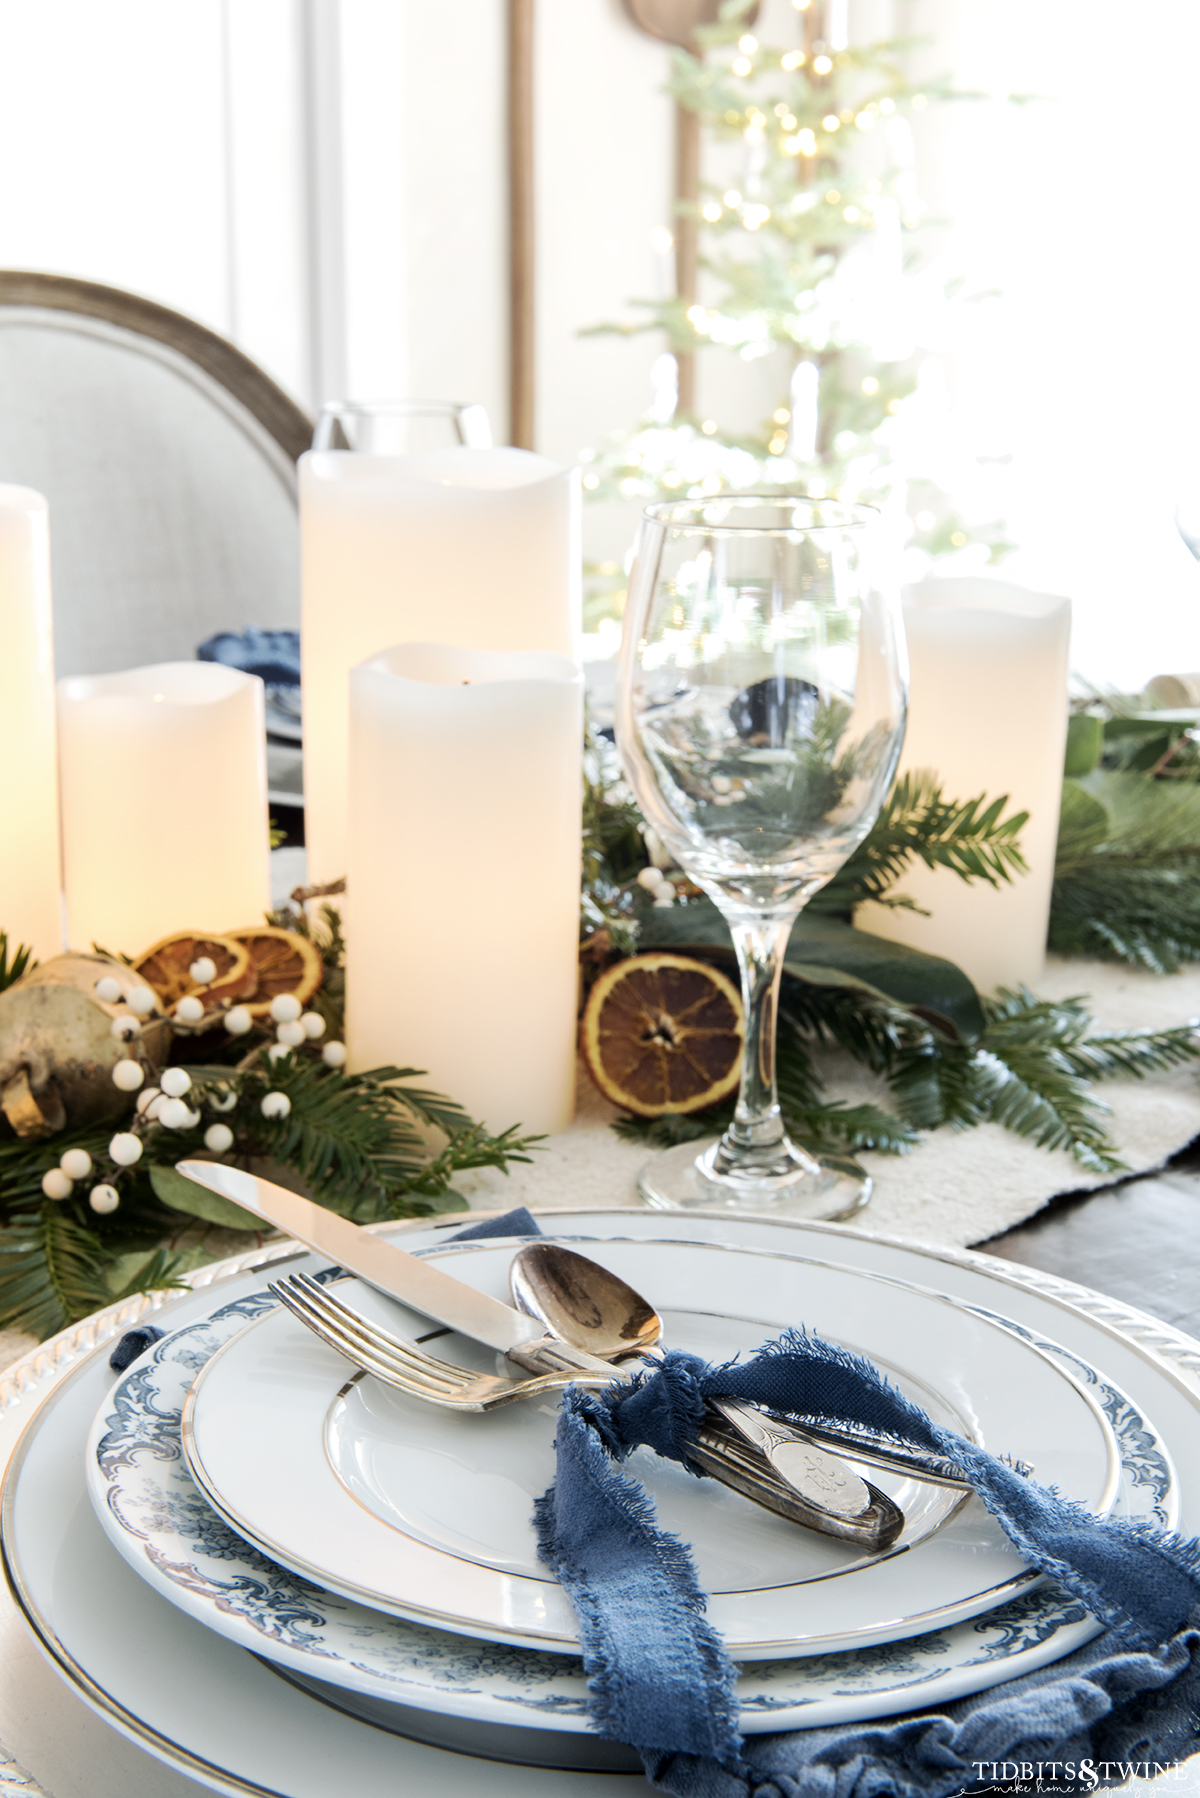 christmas place setting in blue and white with vintage flatware tied with blue velvet ribbon